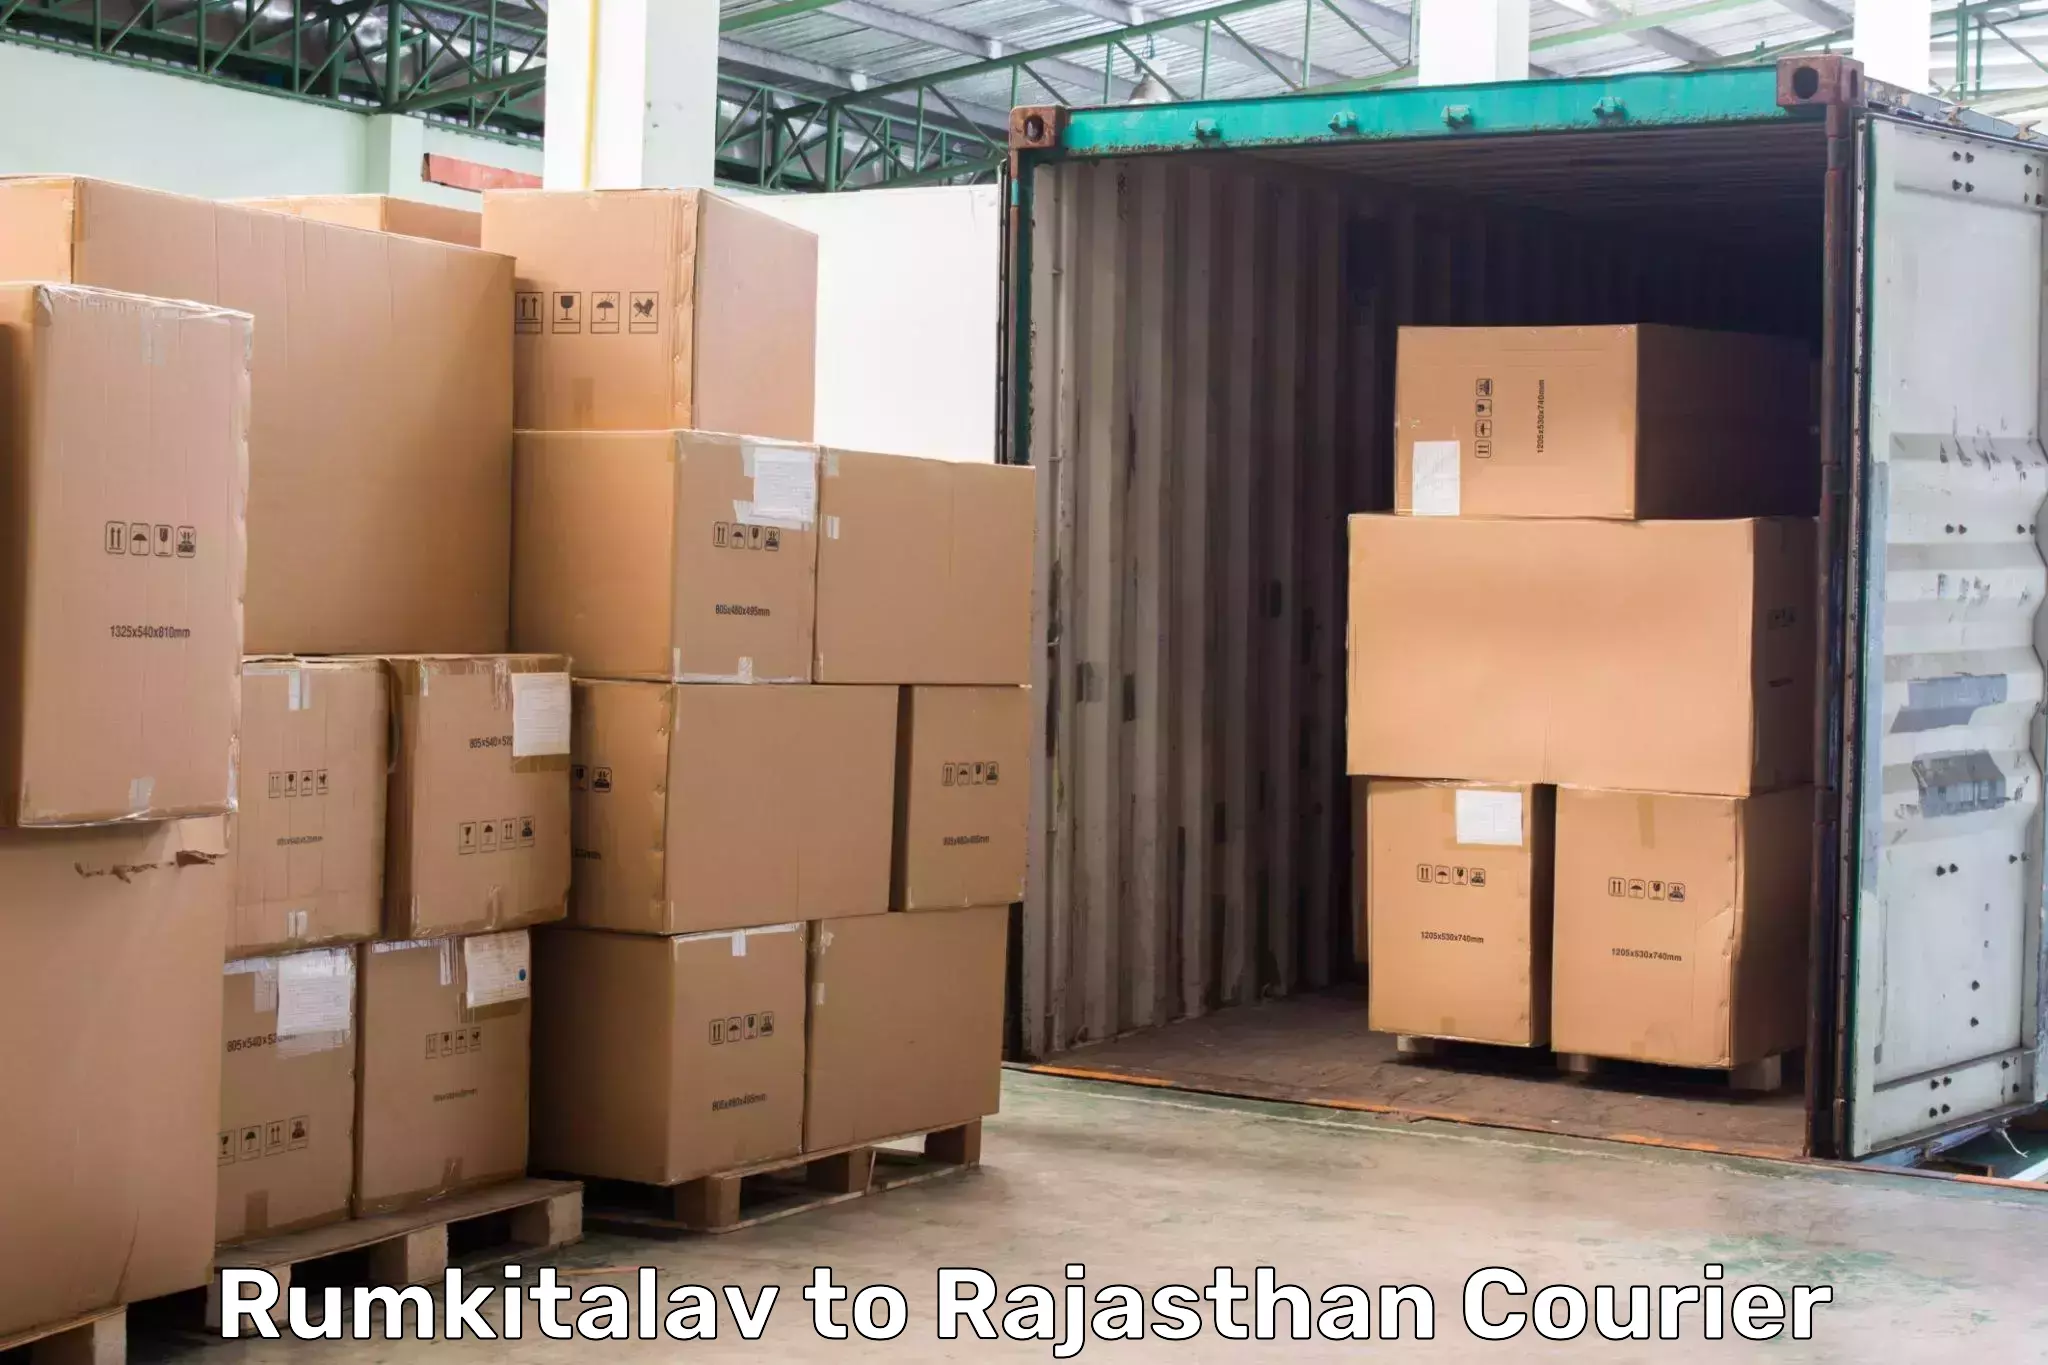 Efficient order fulfillment Rumkitalav to Yeswanthapur